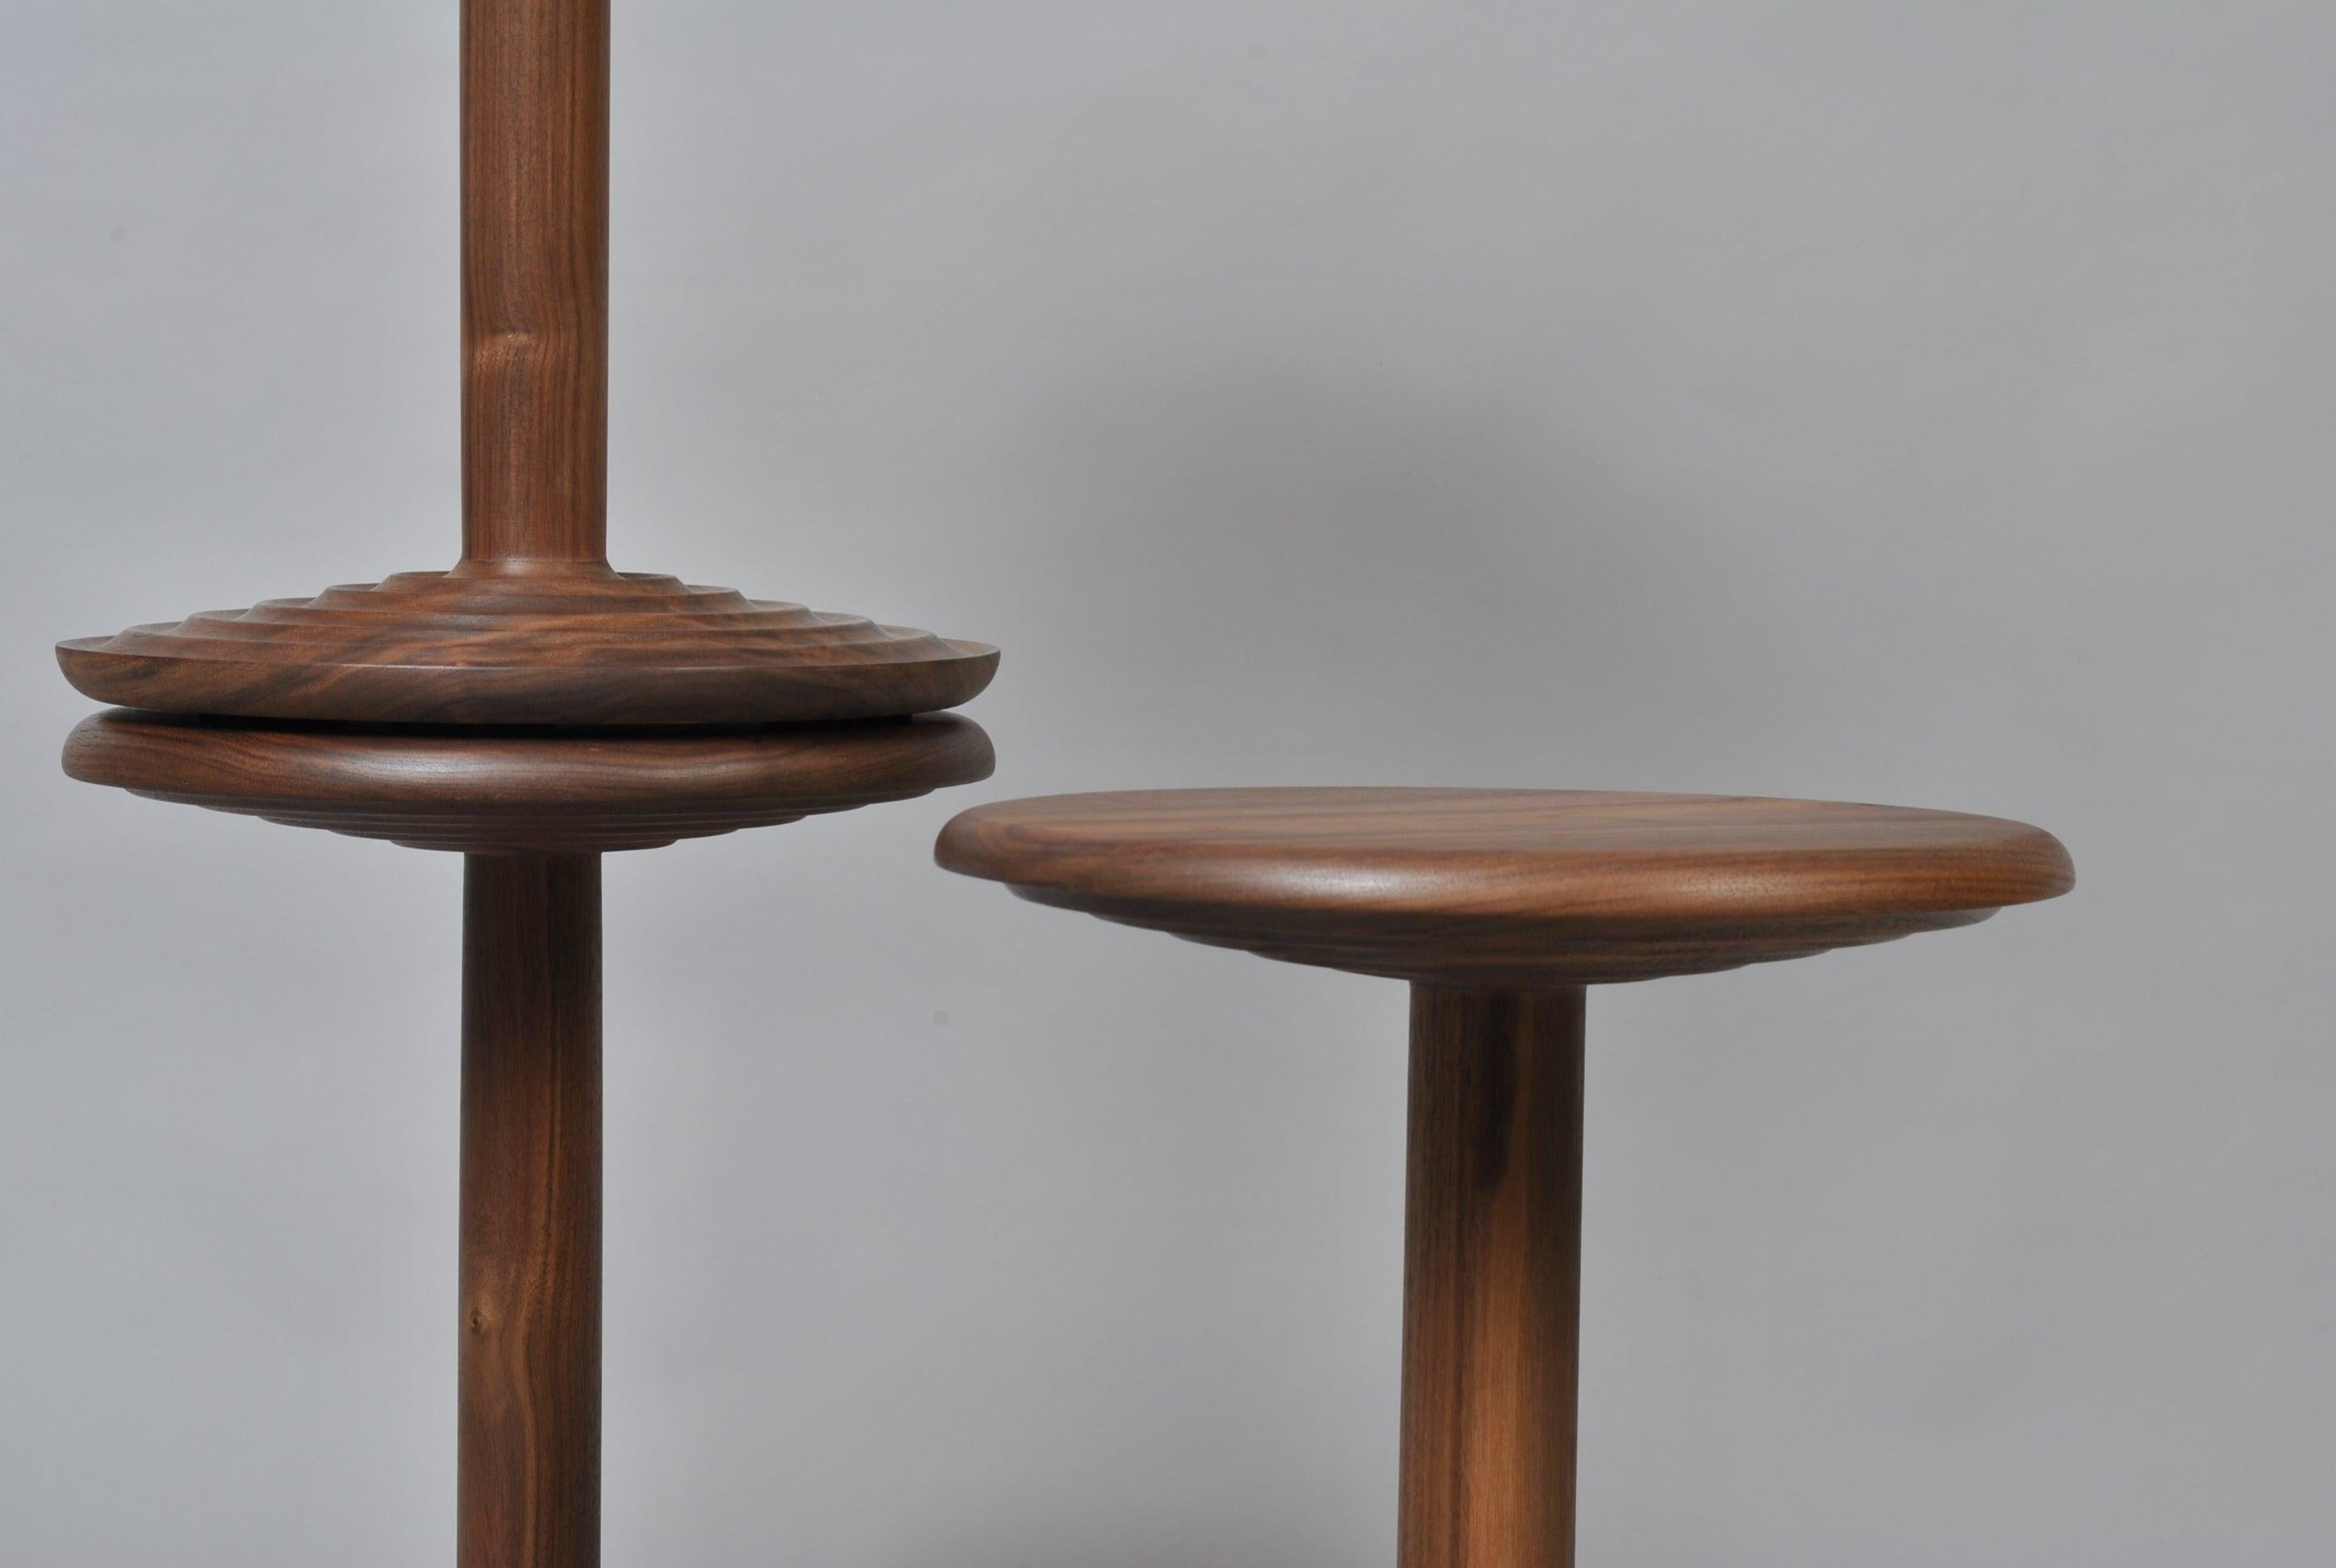 Beautifully turned and handcrafted walnut side table in modernist midcentury design. Perfect in form and scale. This is a bespoke piece of the finest quality, handmade by our master craftsman in the UK using American black walnut. Hand finished with